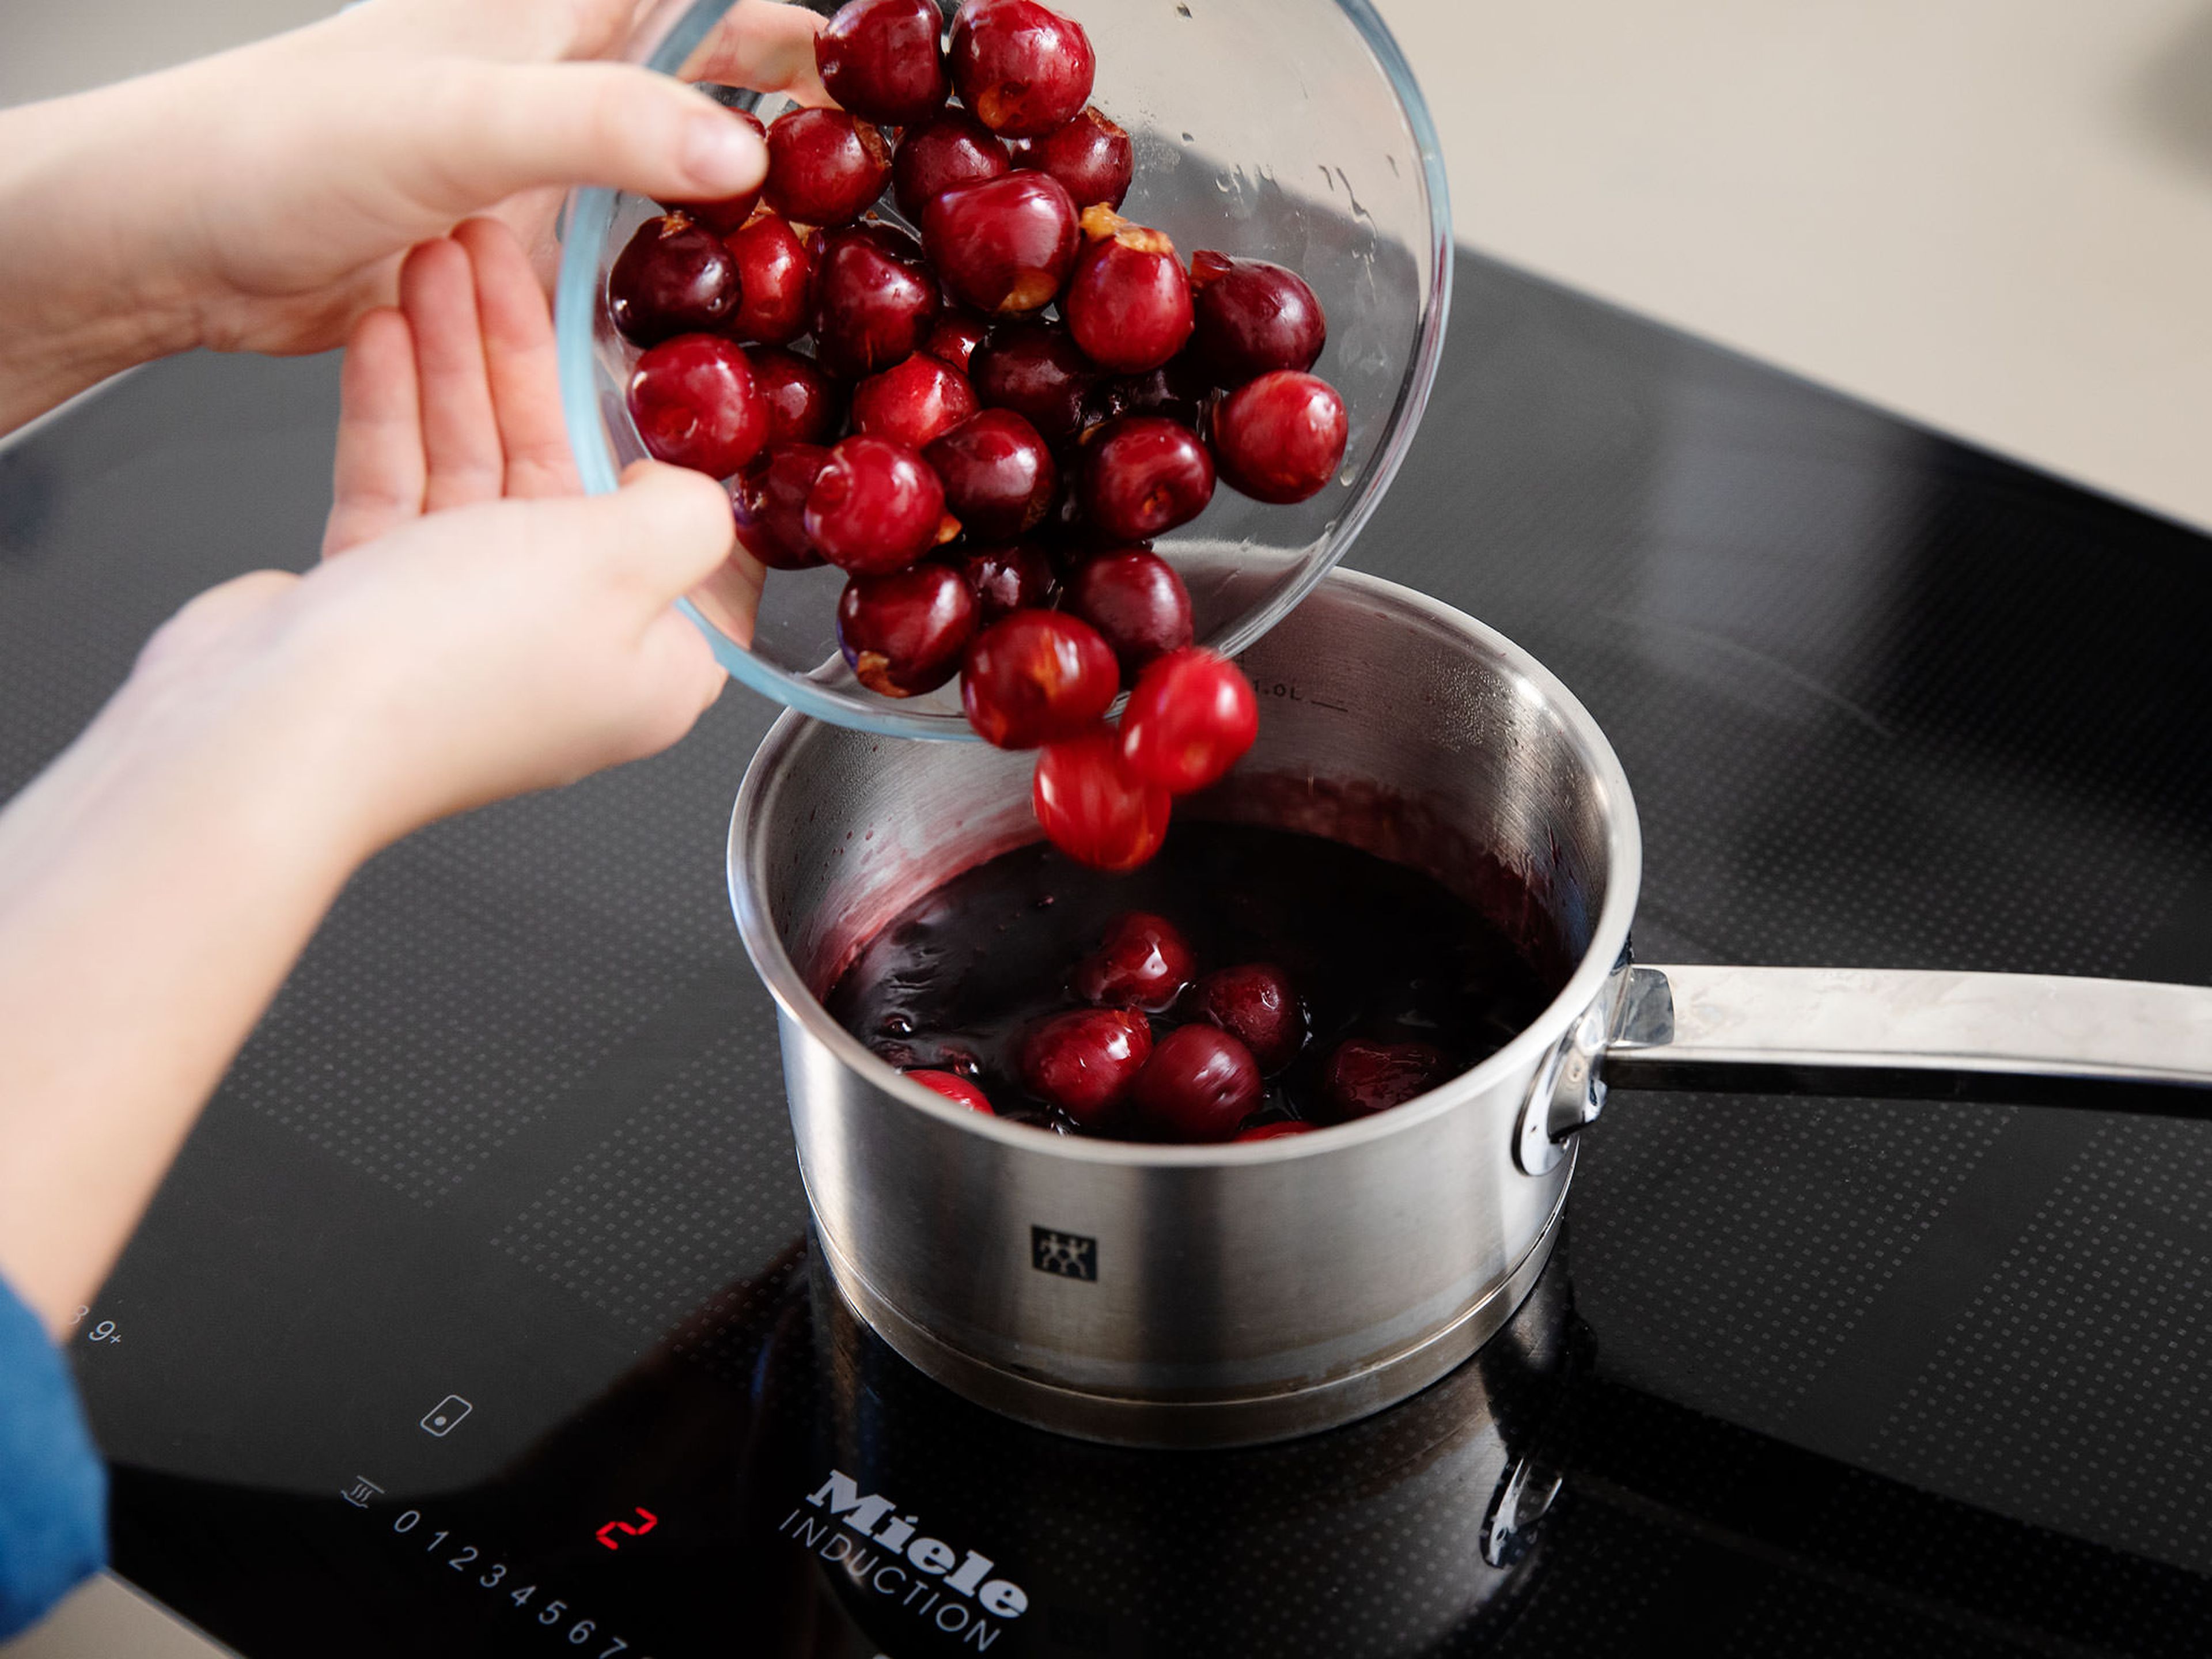 Using a knife, halve cherries and remove the pits. In a small pot, mix cherry juice, bourbon, and starch. Add a portion of the vanilla sugar and cherries and heat over medium-high heat, stirring occasionally, until the cherry mixture has thickened. Transfer to the fridge and allow to cool until serving.